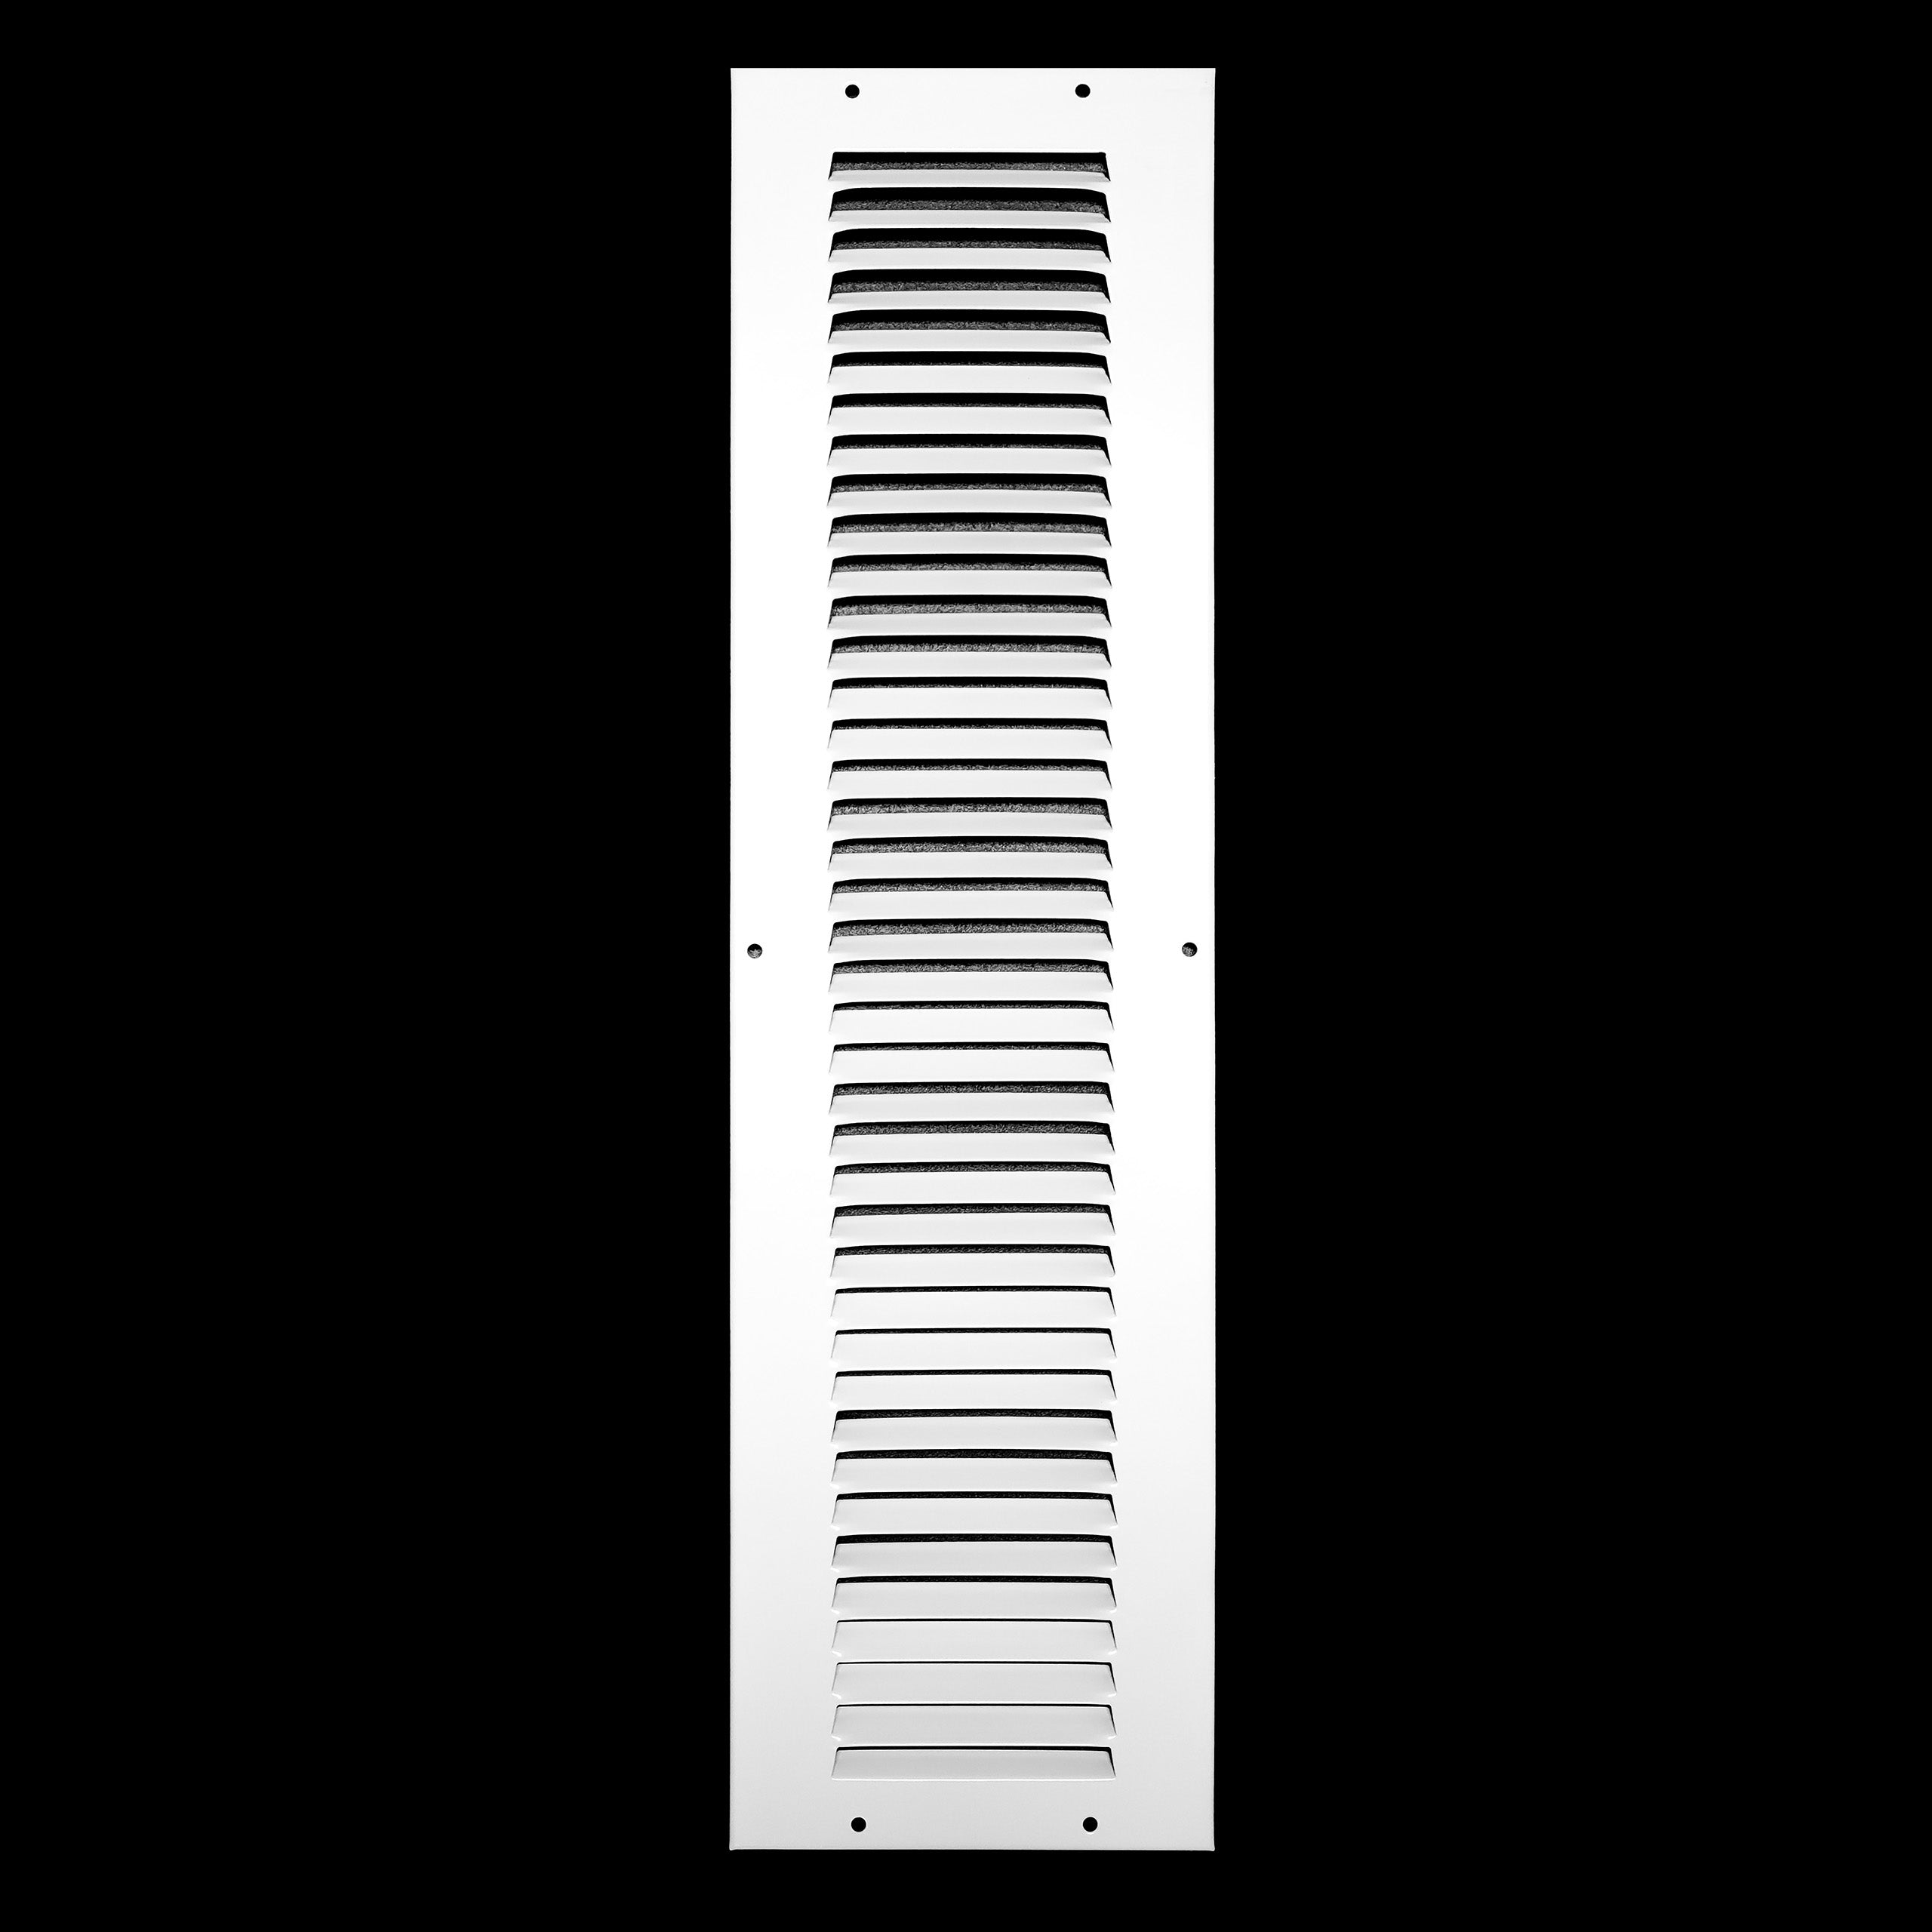 airgrilles 4" x 20" duct opening hd steel return air grille for sidewall and ceiling 7hnd-flt-rg-wh-4x20 038775640978 1